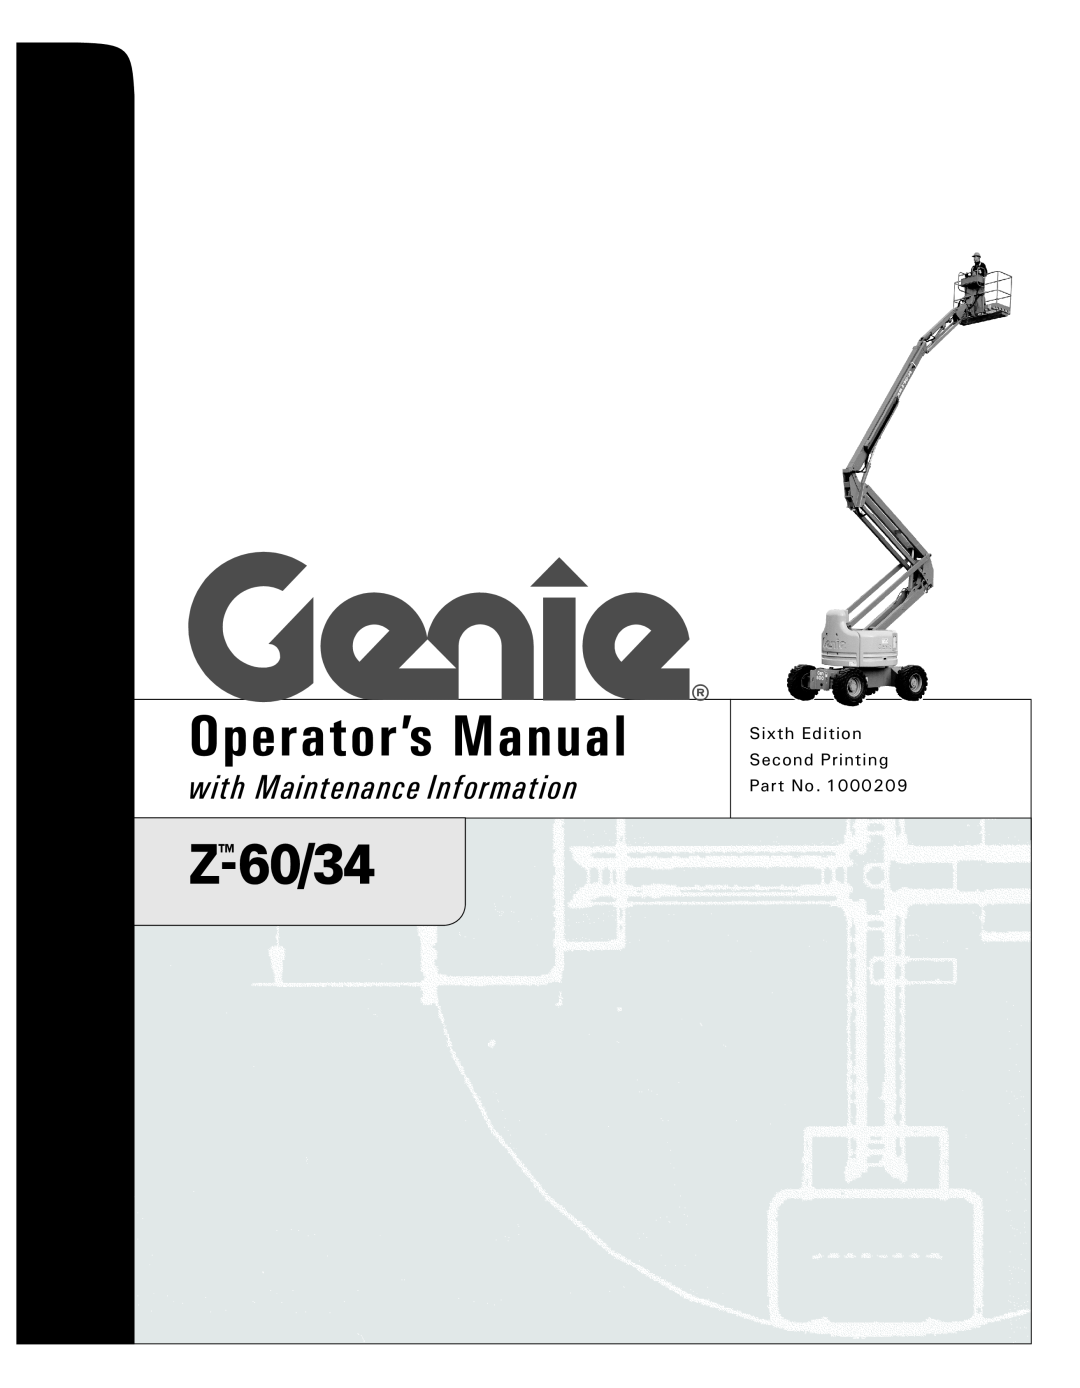 Genie Z-60, Z-34 manual Operator’s Manual, with Maintenance Information, Sixth Edition Second Printing Part No 